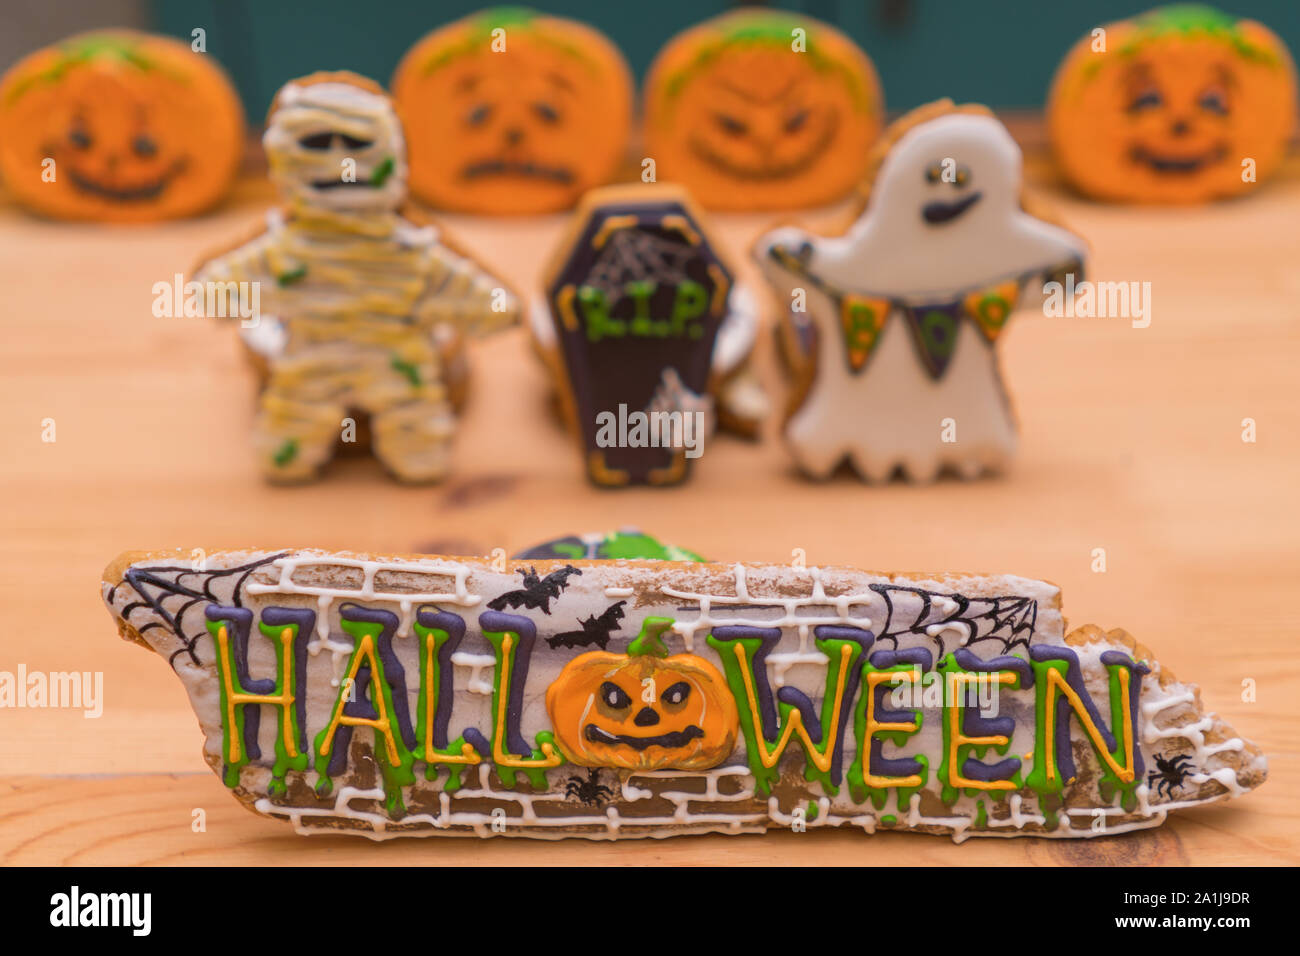 Halloween decals on gingerbreads and ghosts in the background in unfocus. Preparing for a Halloween party. Festive table Stock Photo